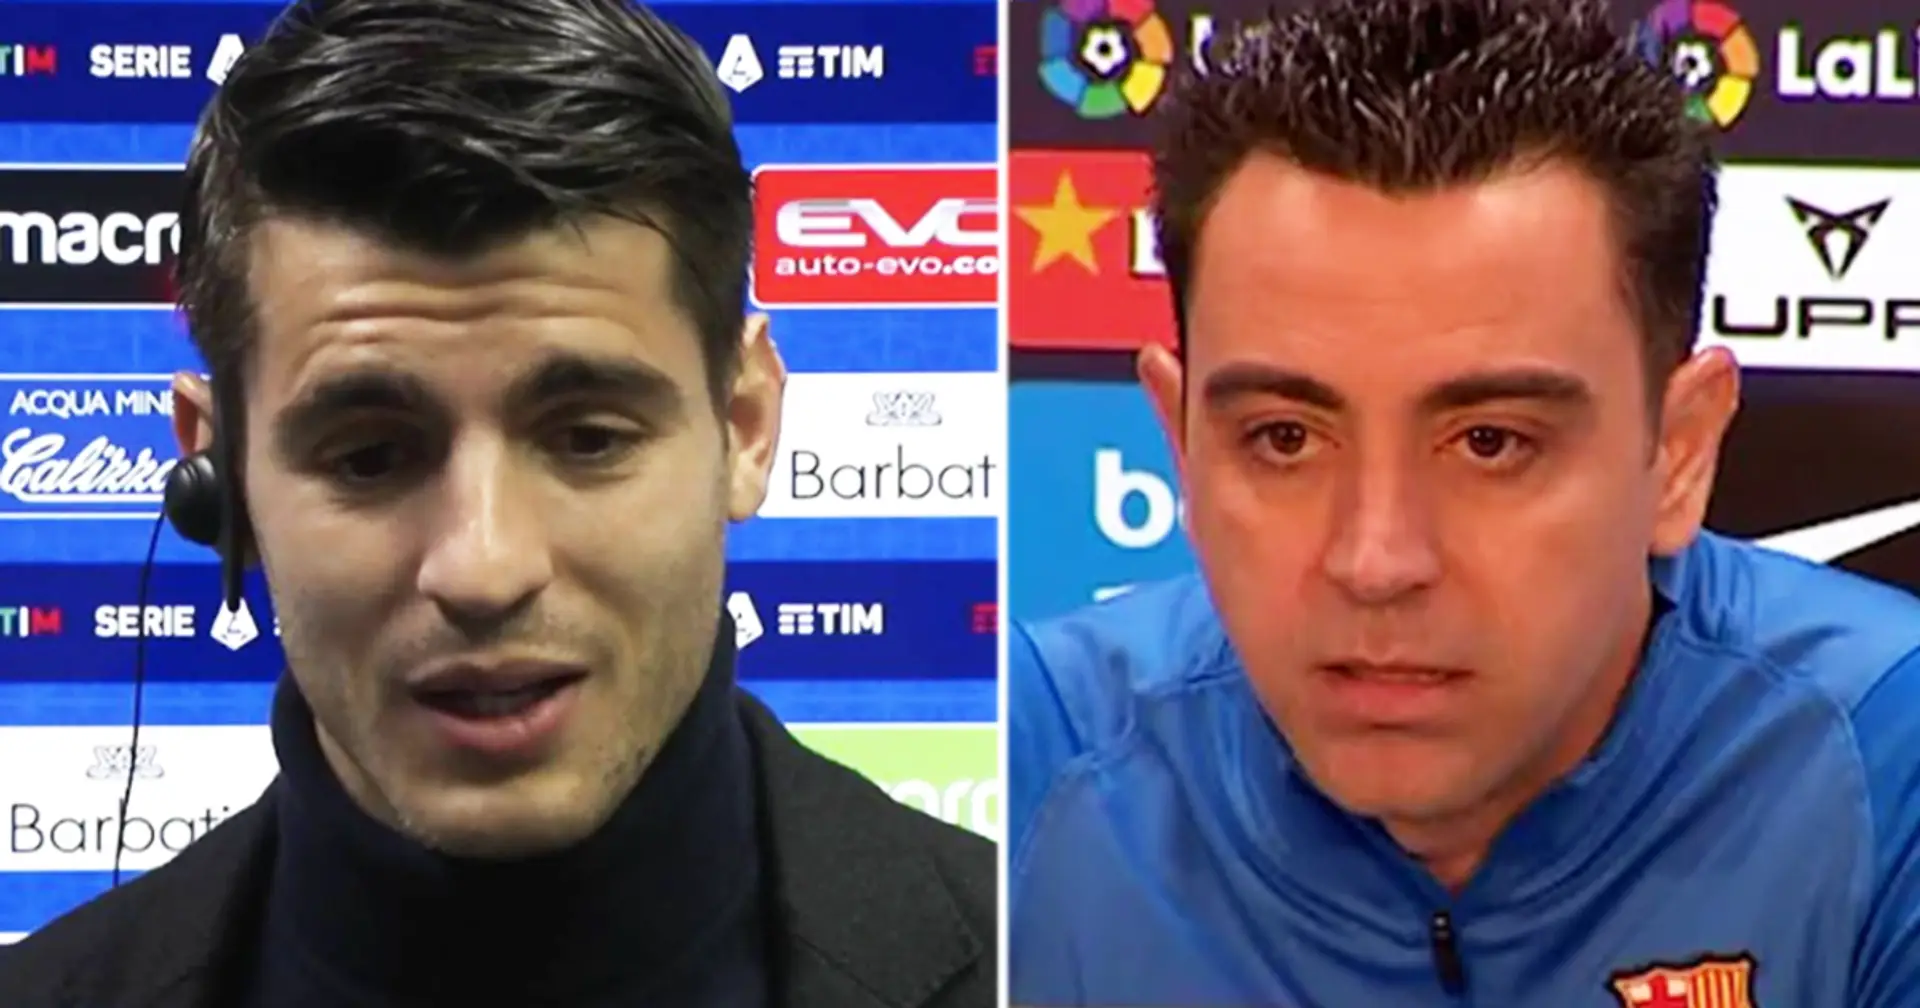 'I don't know if I will stay at Juventus': Morata on his future